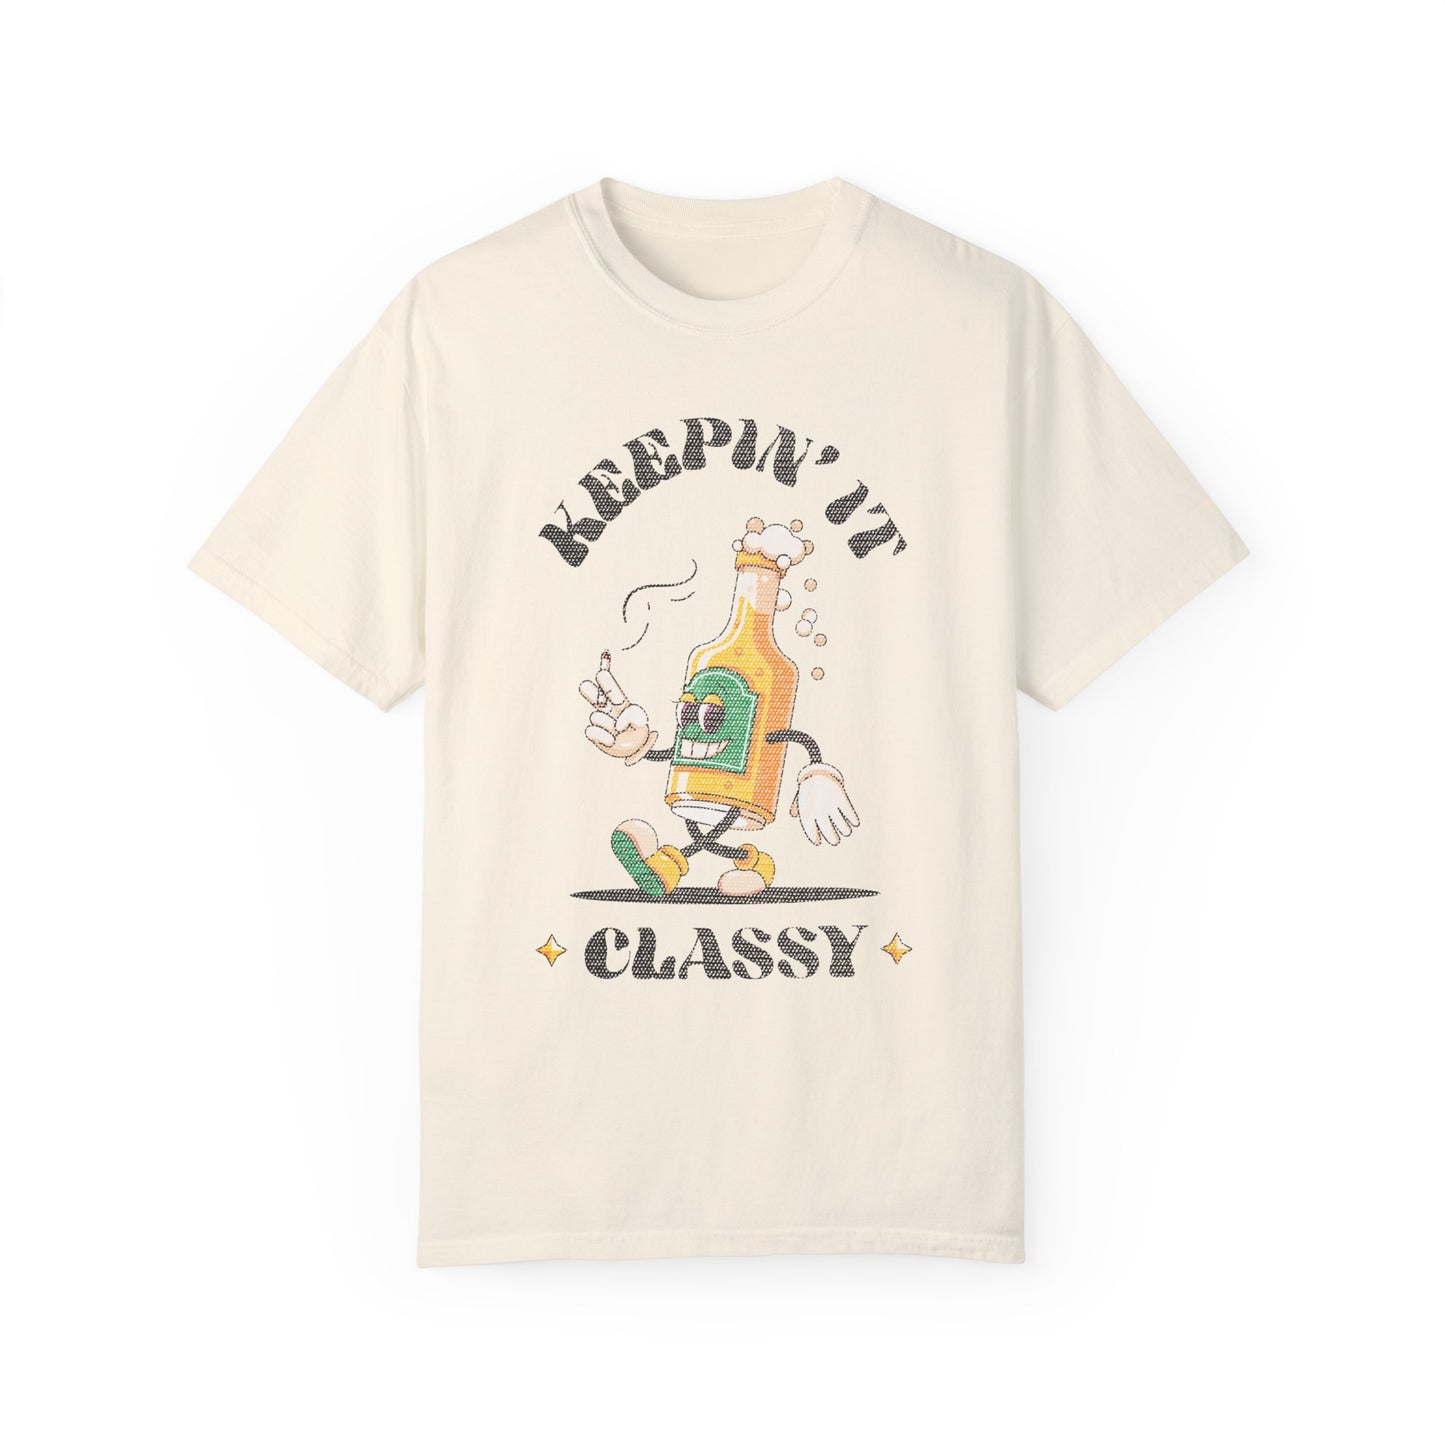 Keepin' It Classy | Funny Graphic T-shirt